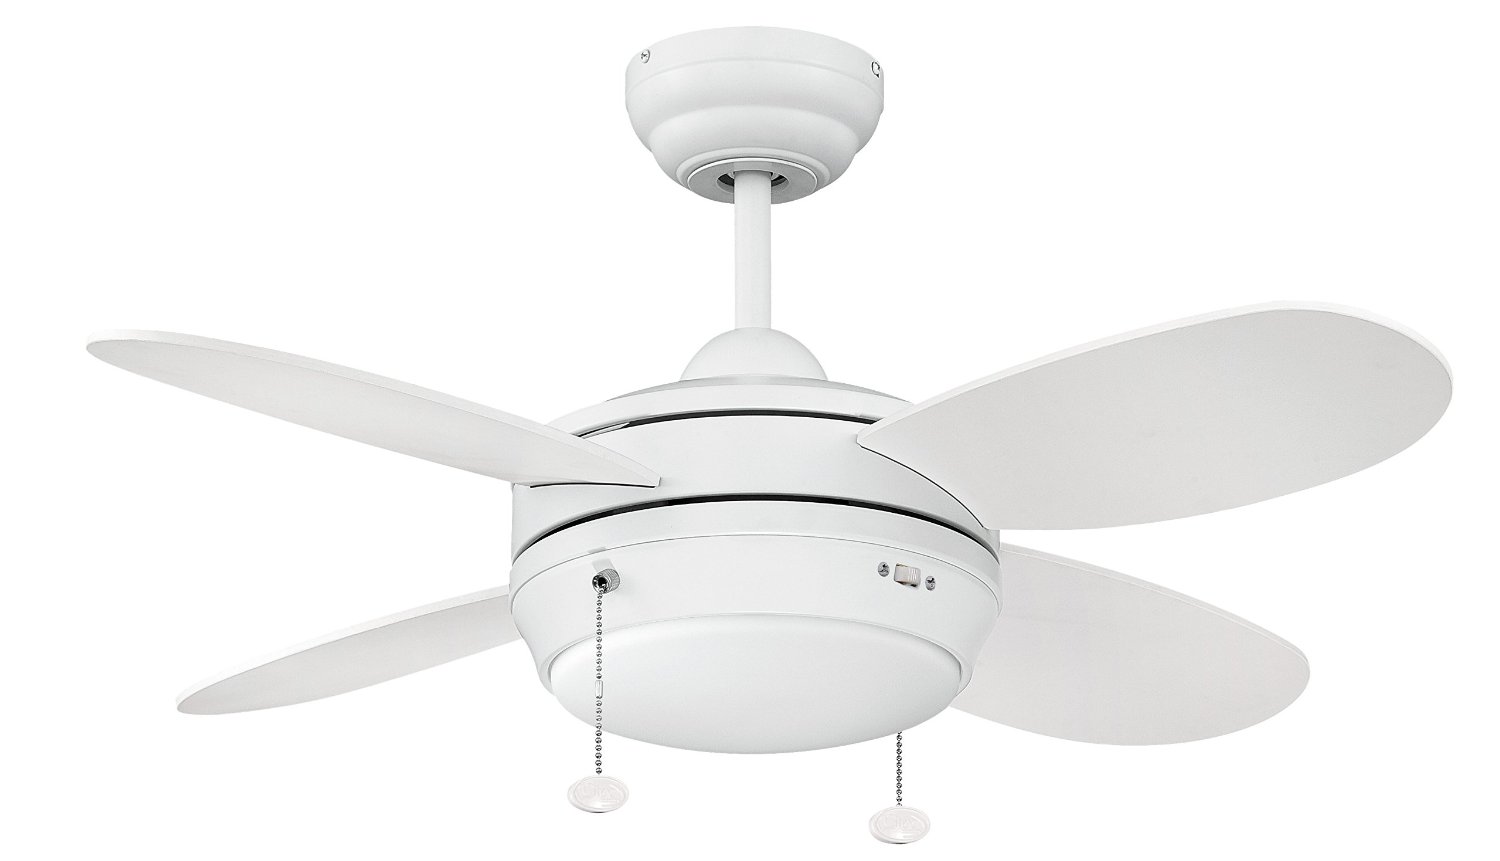 Litex E-MLV36MWW4LK1 Maksim Collection 36-Inch Ceiling Fan with Four Matte White Blades and Single Light Kit with Opal Frosted Glass